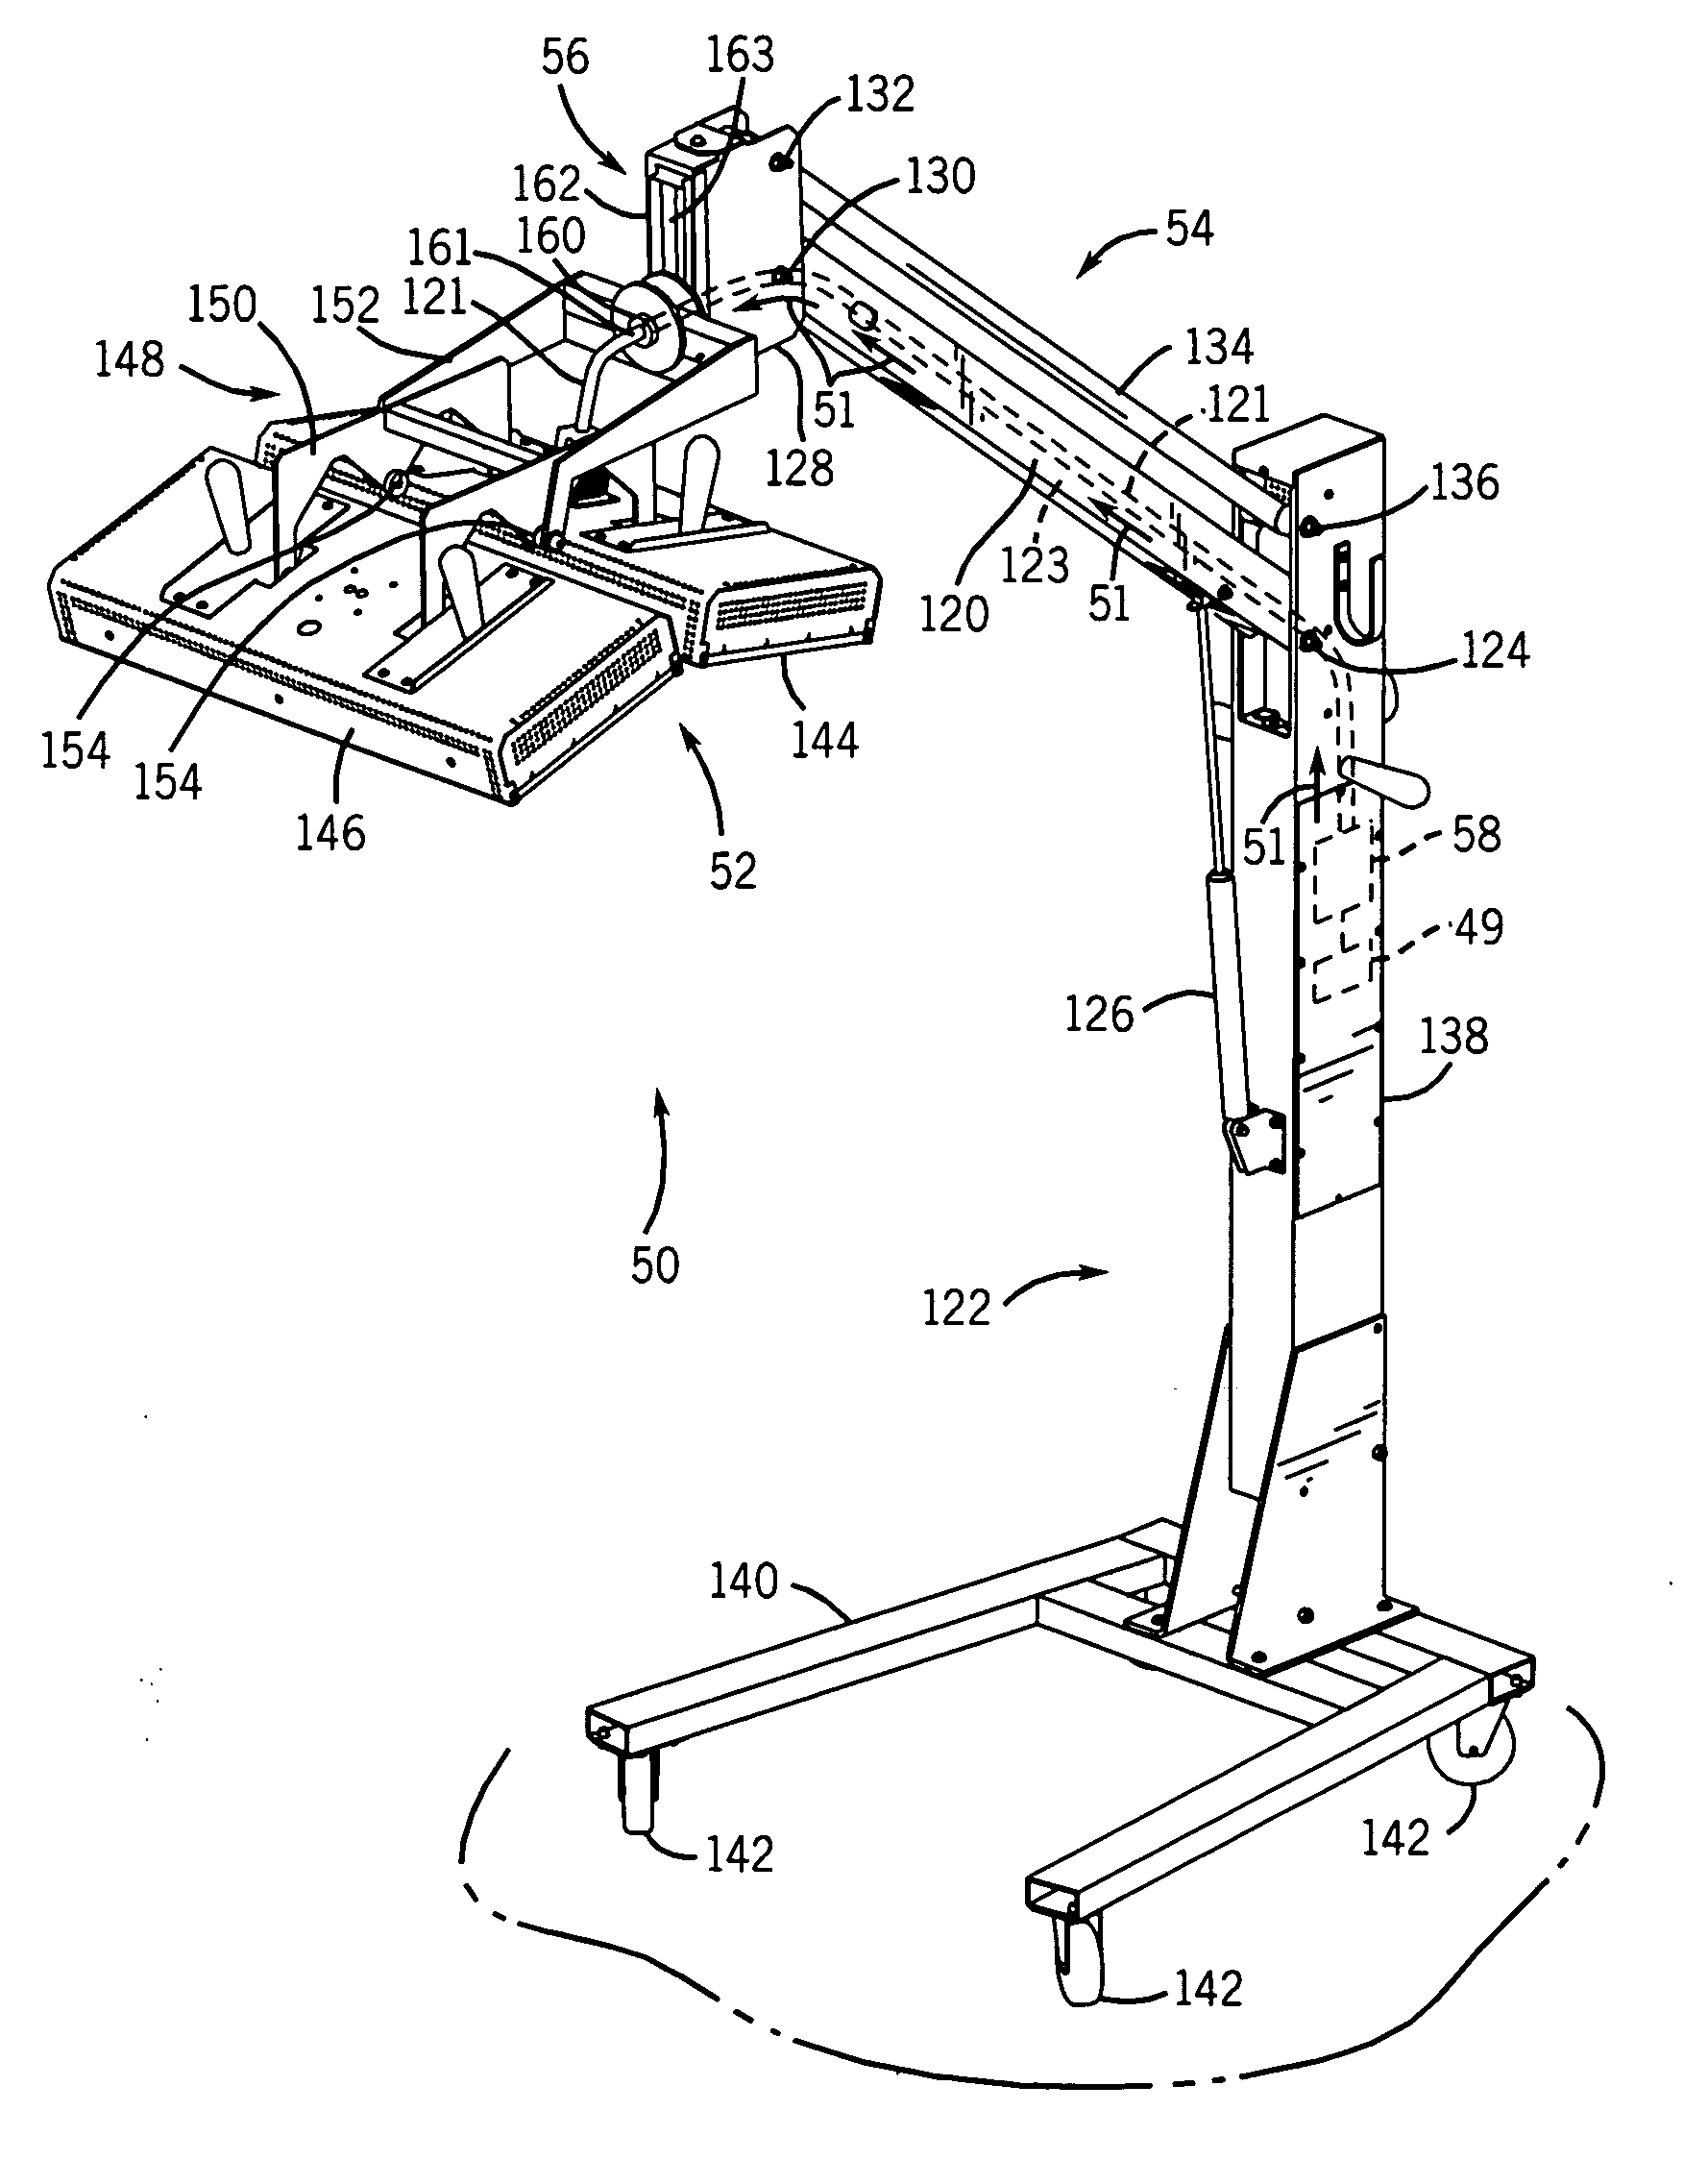 System and method having arm with cable passage through joint to infrared lamp